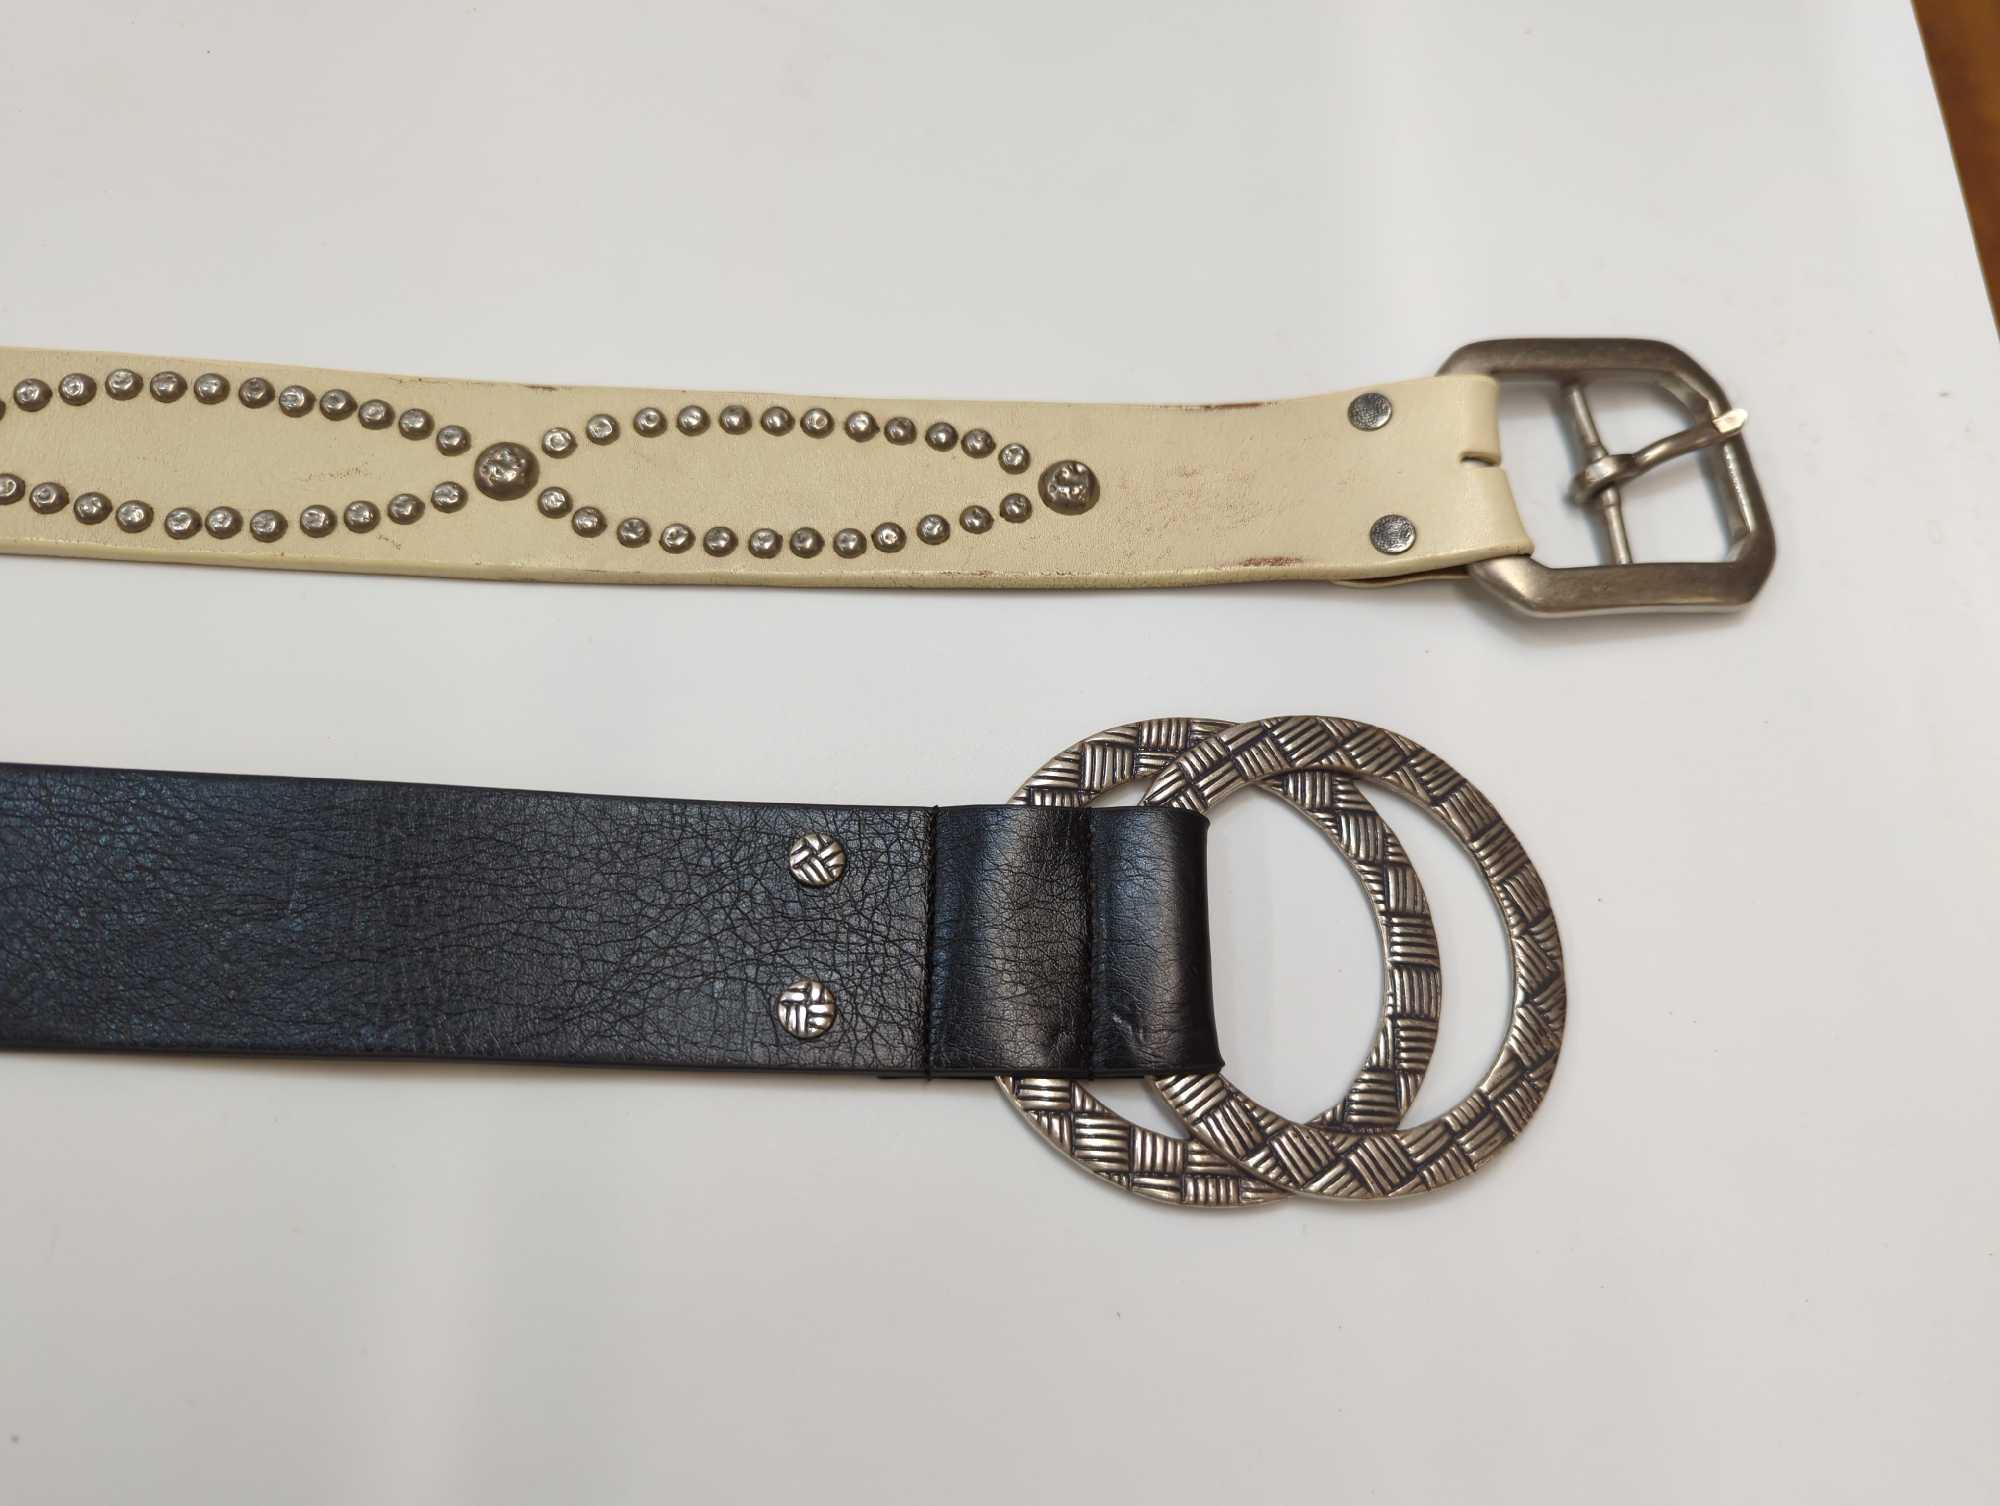 CHICO'S FACE MAN MADE MATERIALS BACK GENUINE LEATHER BELT M/L RN#79984, LUCKY BRAND LEATHER BELT